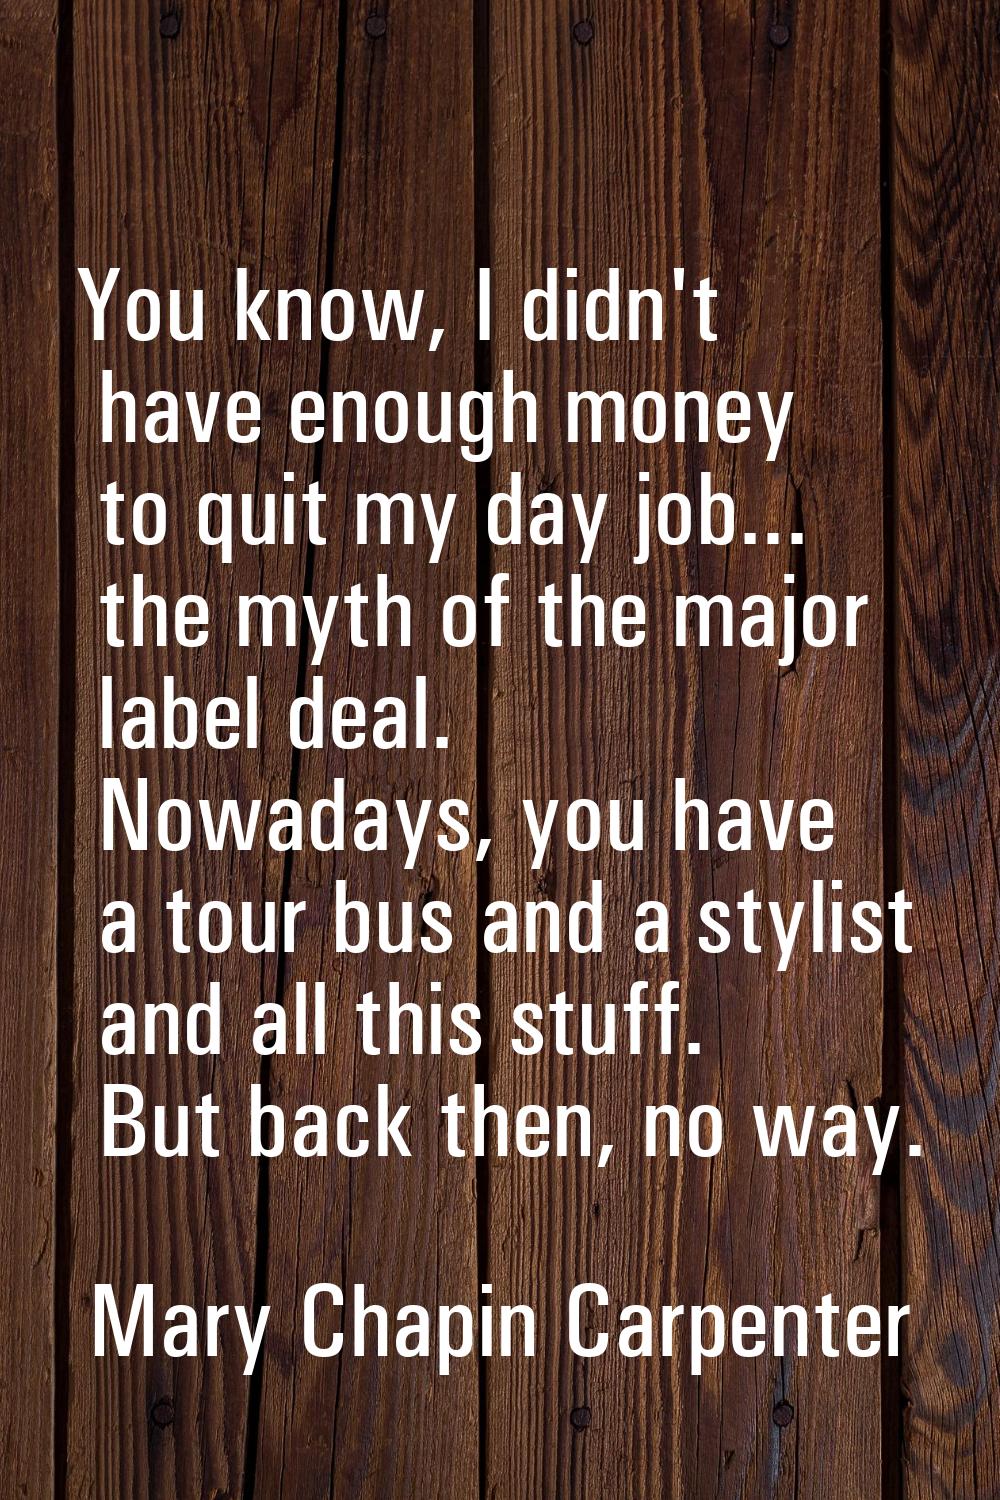 You know, I didn't have enough money to quit my day job... the myth of the major label deal. Nowada